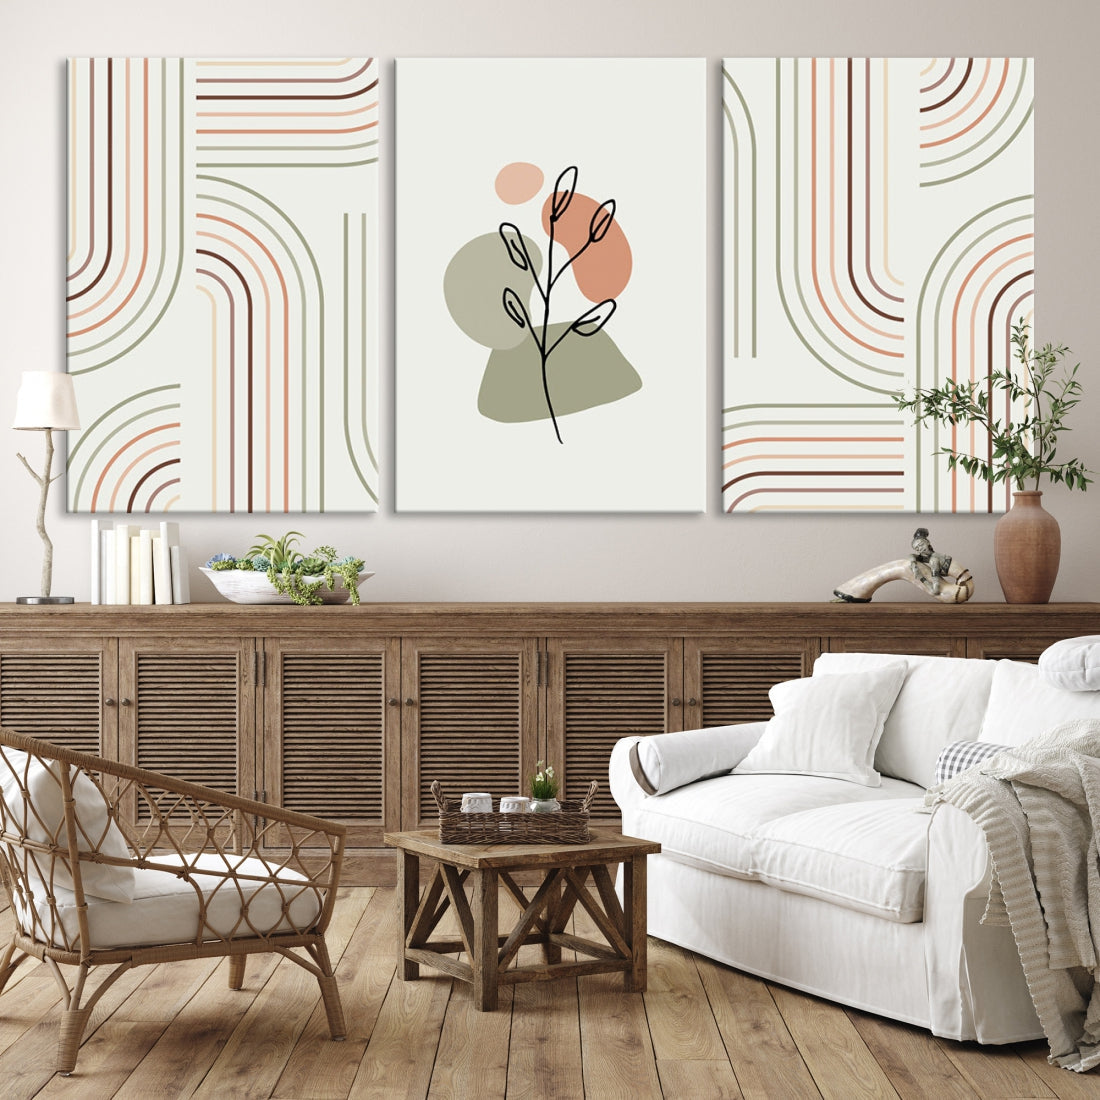 Boho Pastel Colors Floral and Lines Modern Wall Art Canvas Print Wall Decor